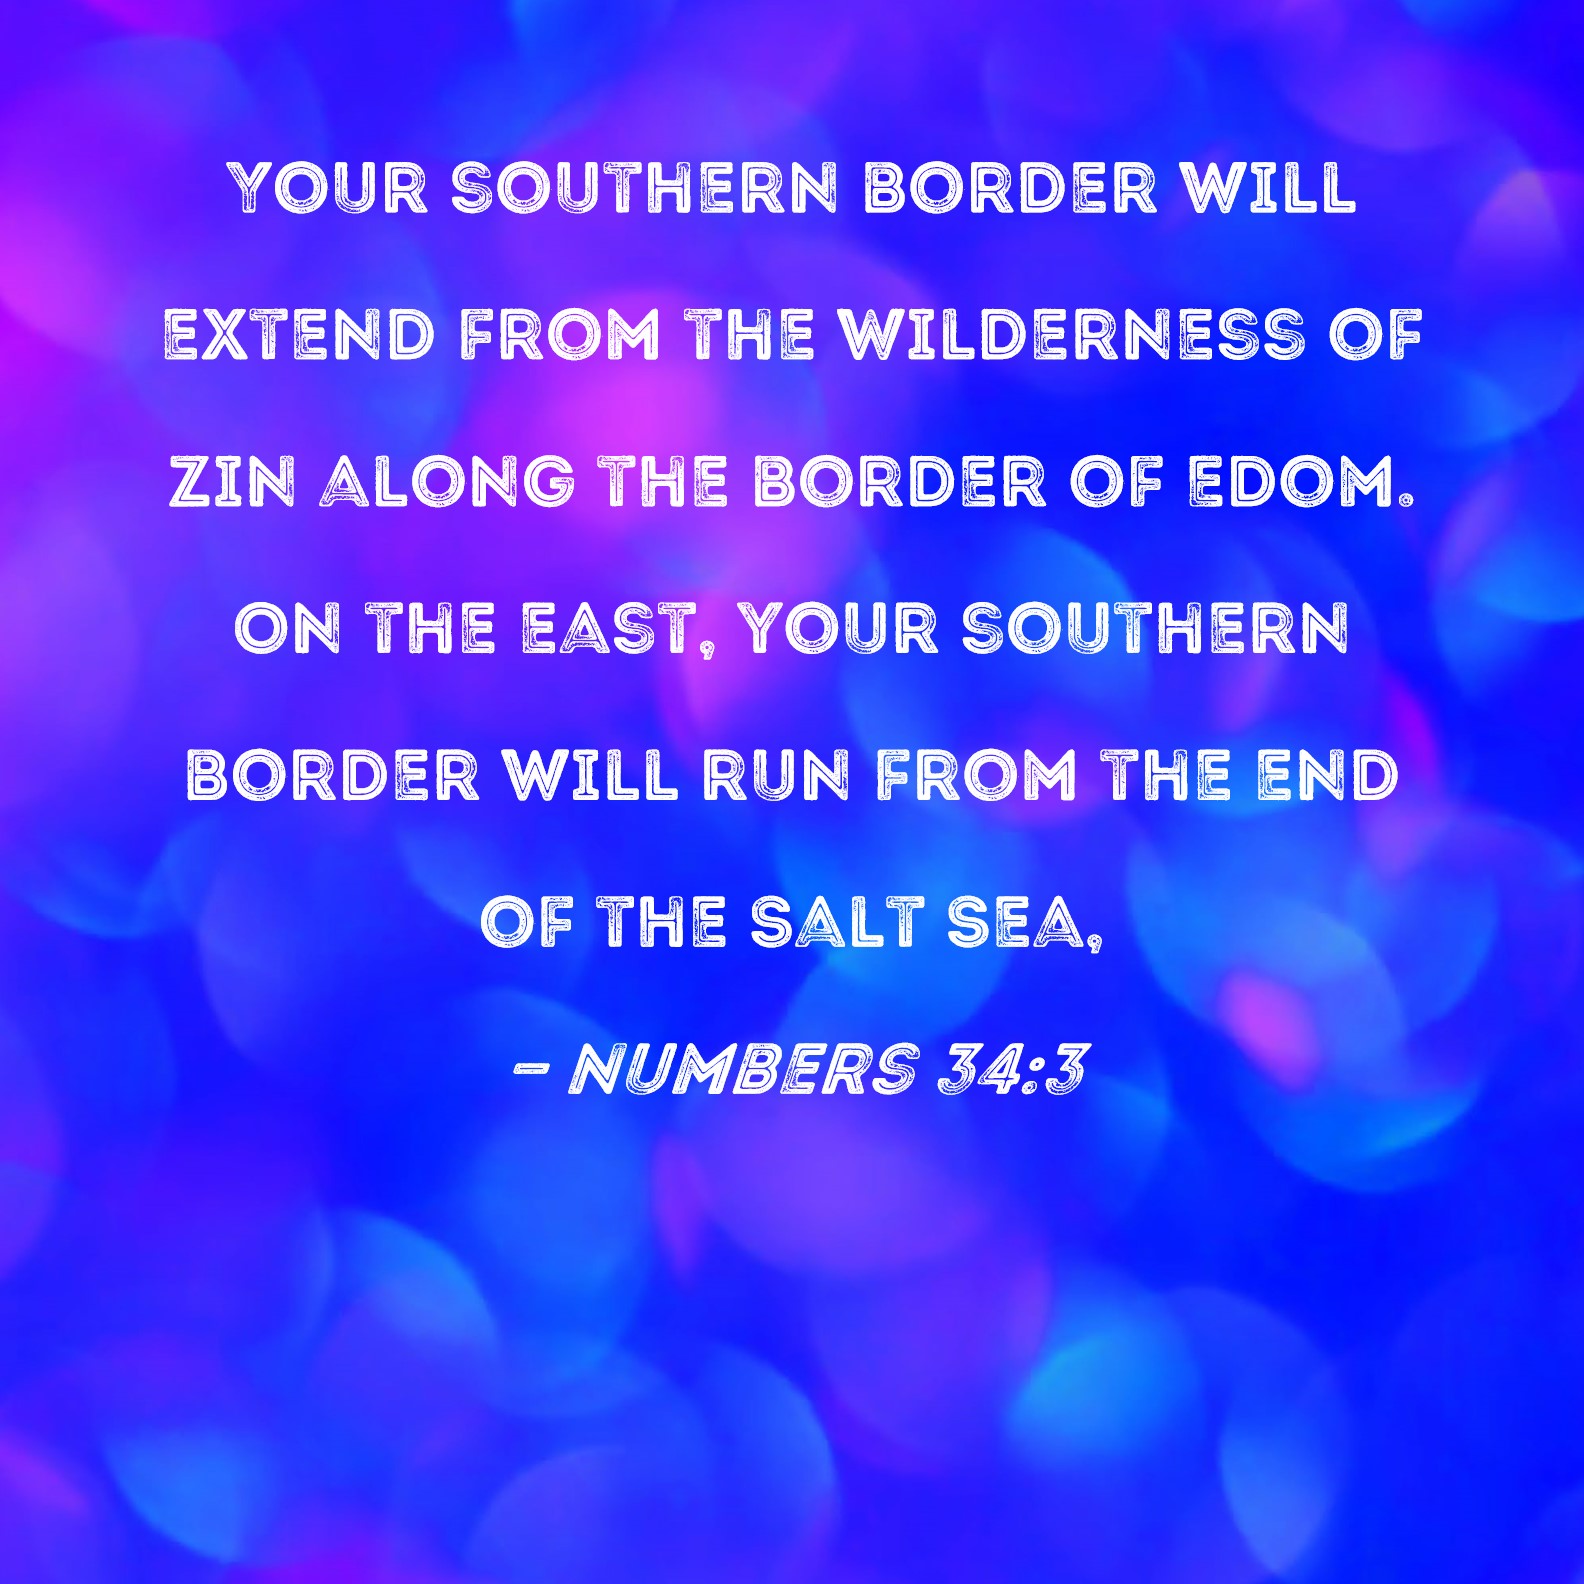 numbers-34-3-your-southern-border-will-extend-from-the-wilderness-of